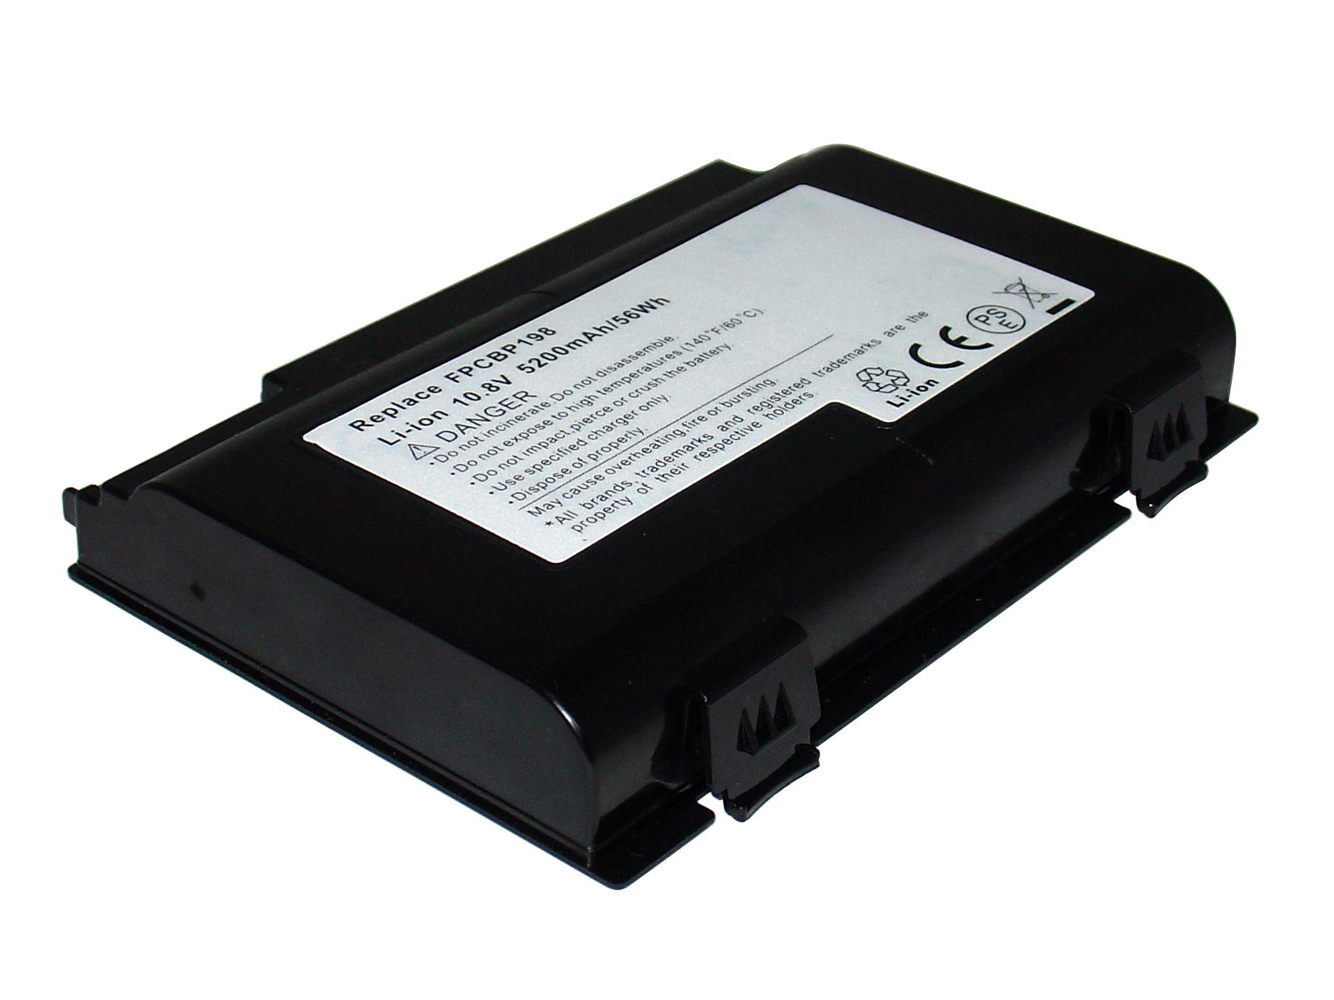 0644670, CP335311-01 replacement Laptop Battery for Fujitsu LifeBook A1220, LifeBook A6210, 5200mAh, 10.80V